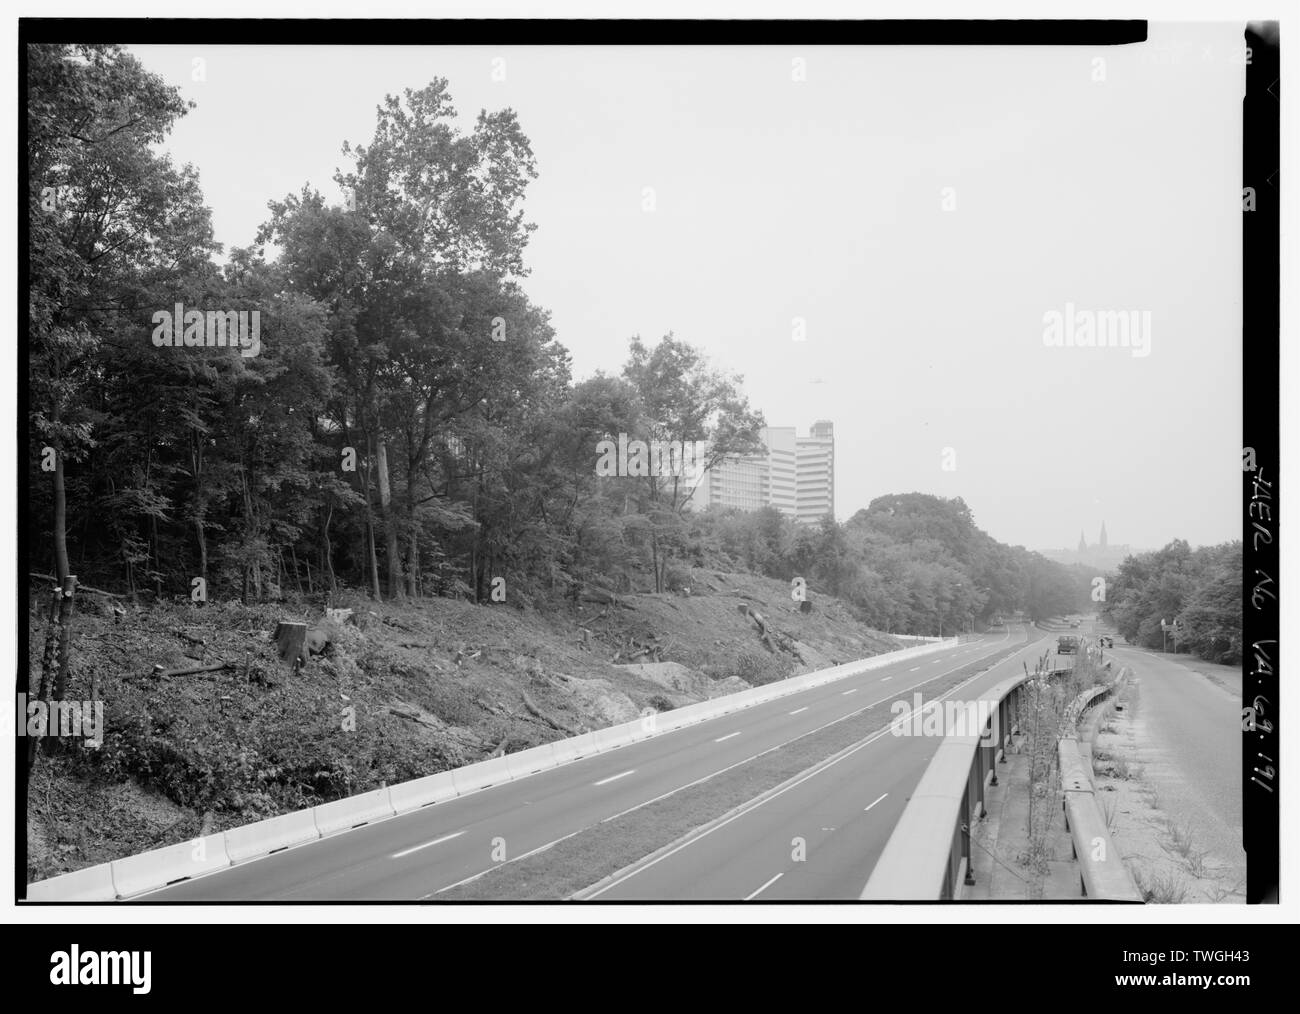 RECONFIGURED AREA OF GWMP FROM THEODORE ROOSEVELT BRIDGE LOOKING NORTH. - George Washington Memorial Parkway, Along Potomac River from McLean to Mount Vernon, VA, Mount Vernon, Fairfax County, VA; Mount Vernon Avenue Association; U.S. Army Corps of Engineers; U.S. Bureau of Public Roads; Clarke, Gilmore; Downer, Jay; Toms, R E; Johnson, J W; Simonson, Wilbur; McNary, J V; Barton, Clara; Mount Vernon Ladies Association; Garden Club of America; Daughters of the American Revolution; United Daughters of the Confederacy; Colonial Dames of America; Association for the Preservation of Virginia Antiqu Stock Photo